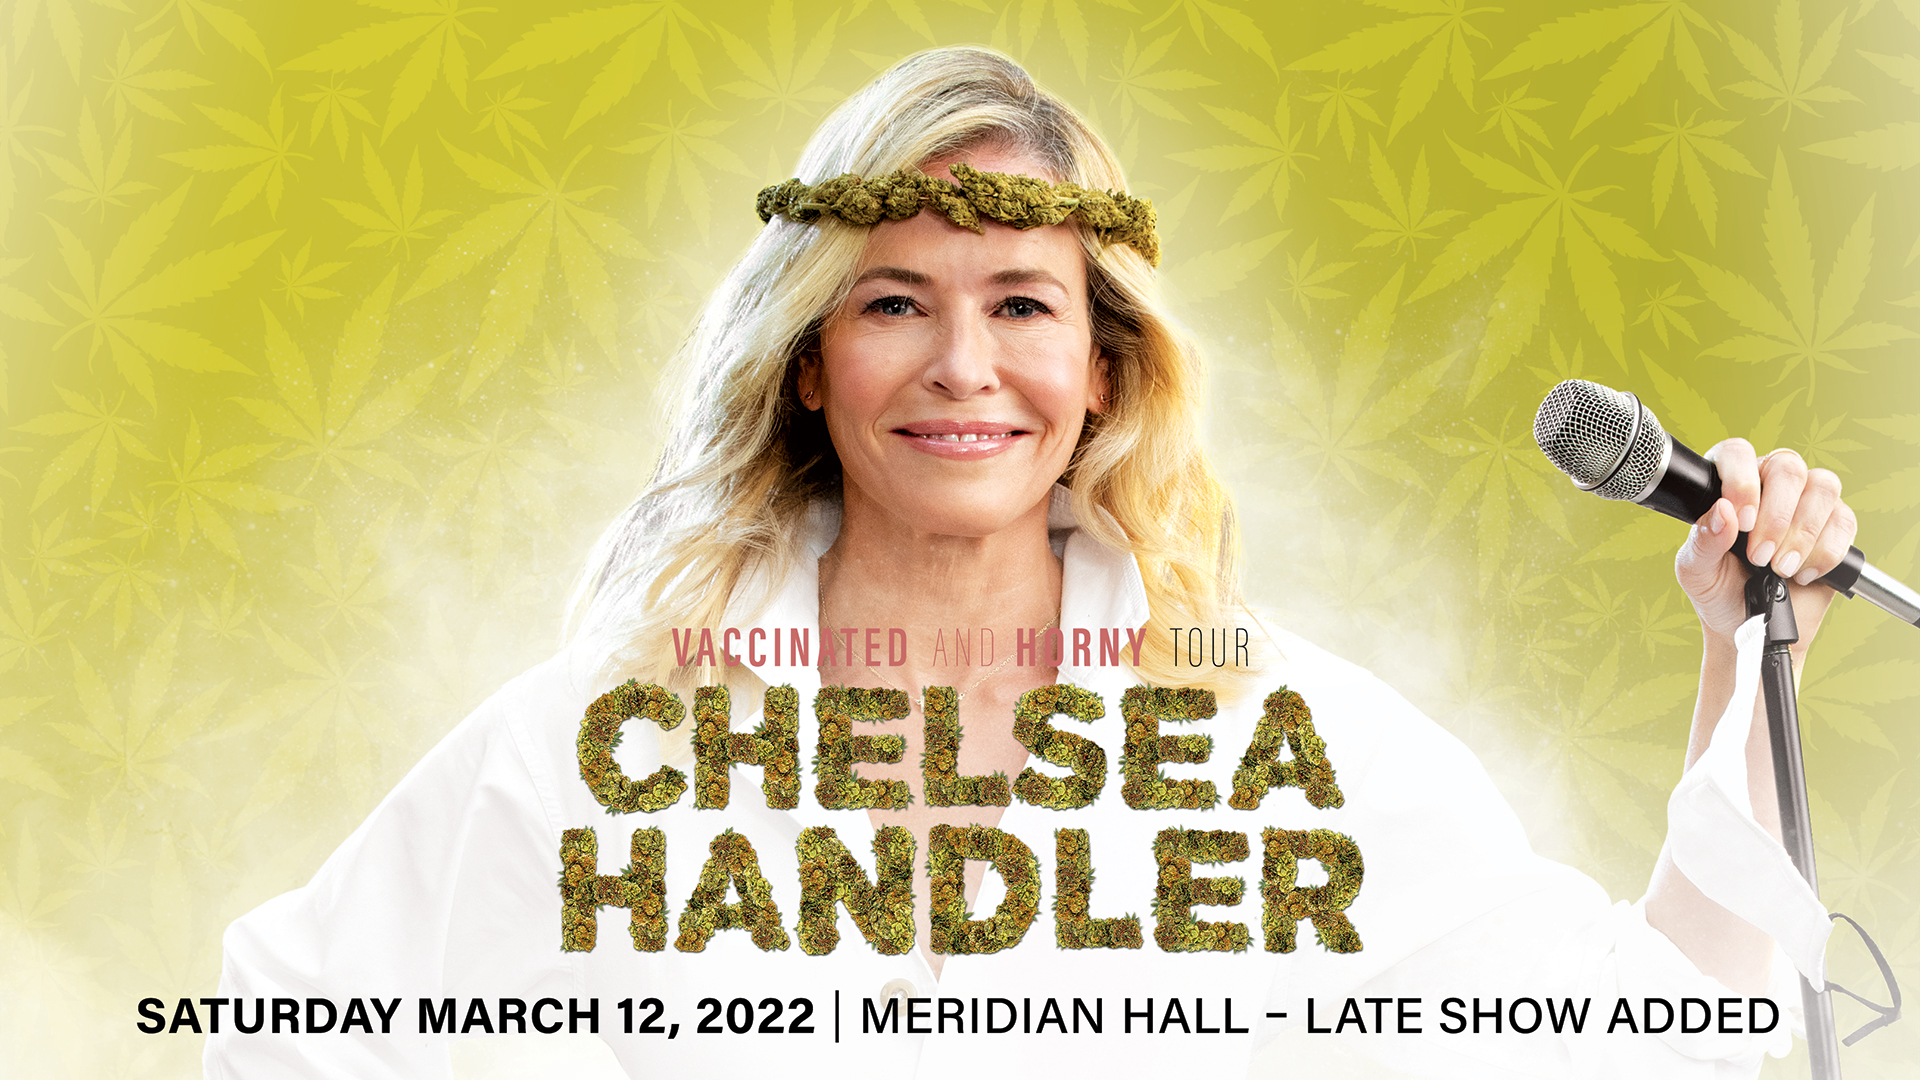 Chelsea Handler Vaccinated and Horny Tour SECOND SHOW Q107 Toronto